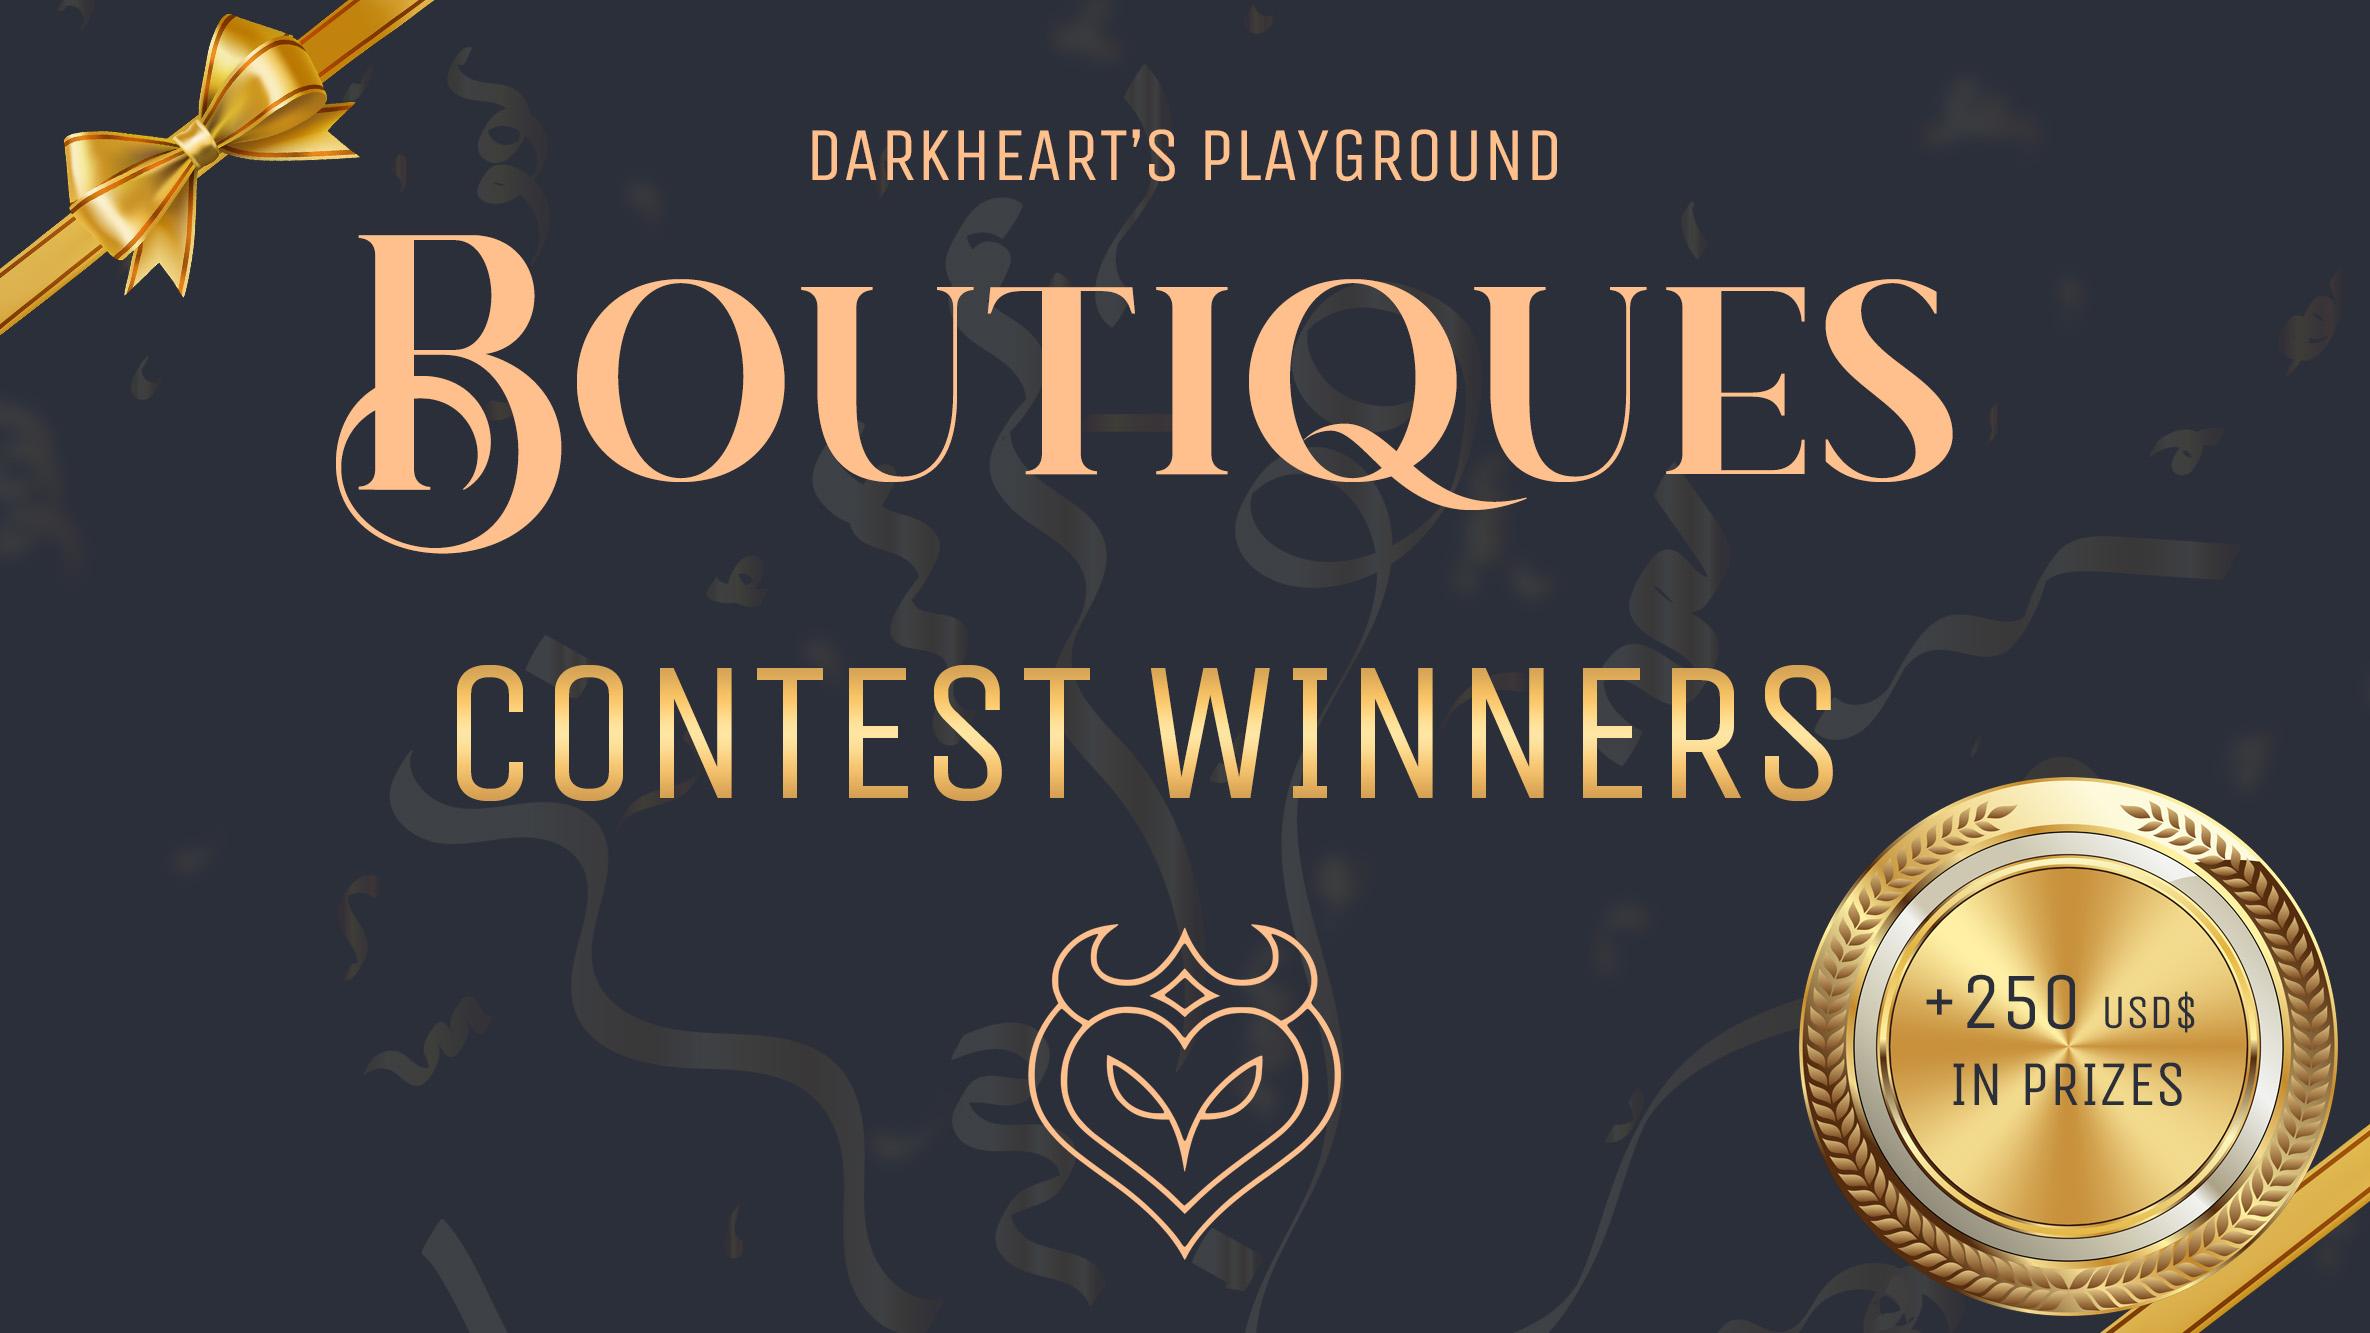 Boutiques' Contest Winners